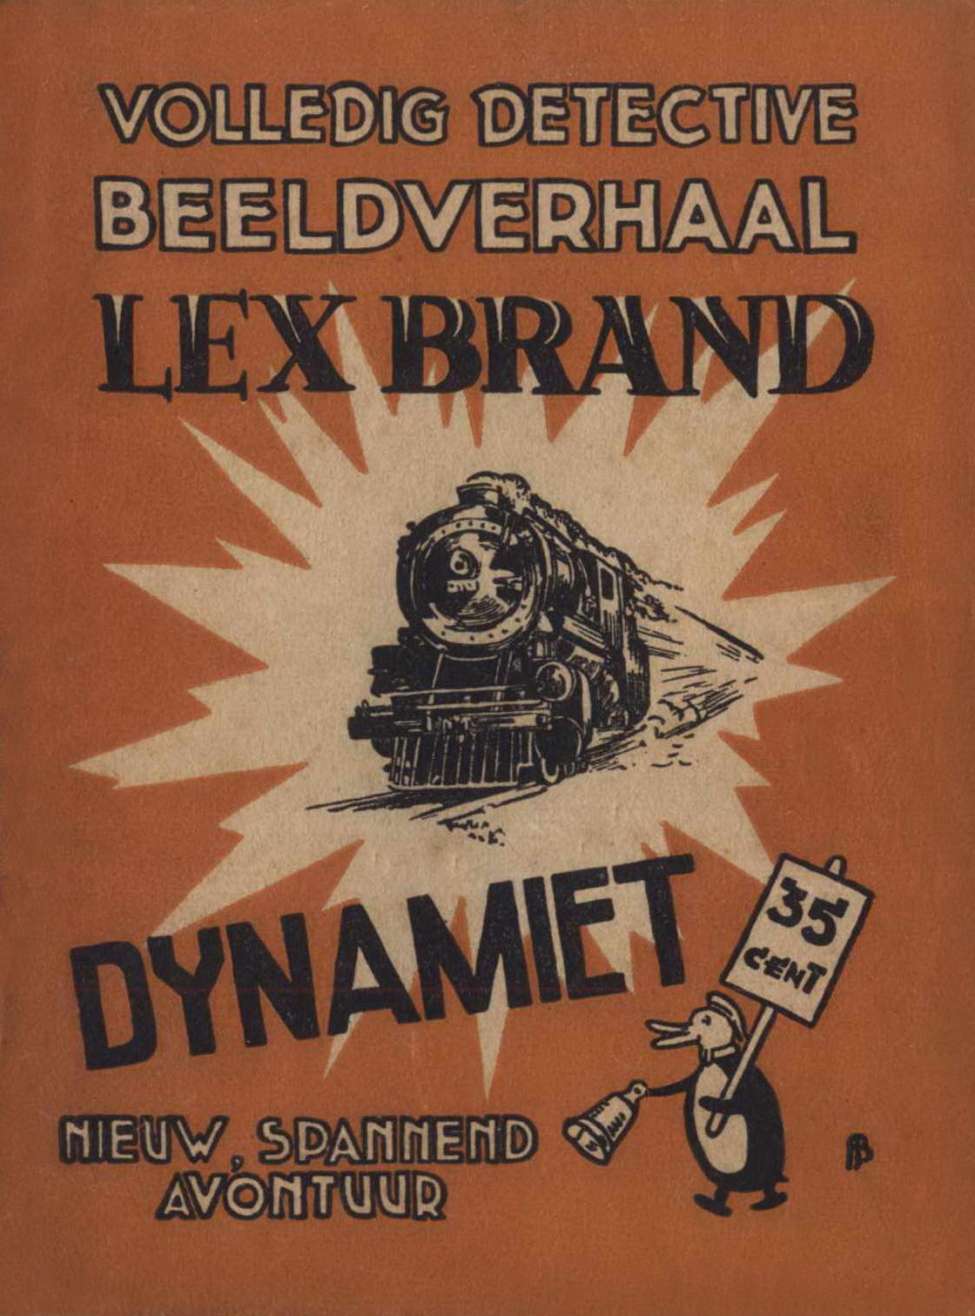 Book Cover For Lex Brand 14 - Dynamiet